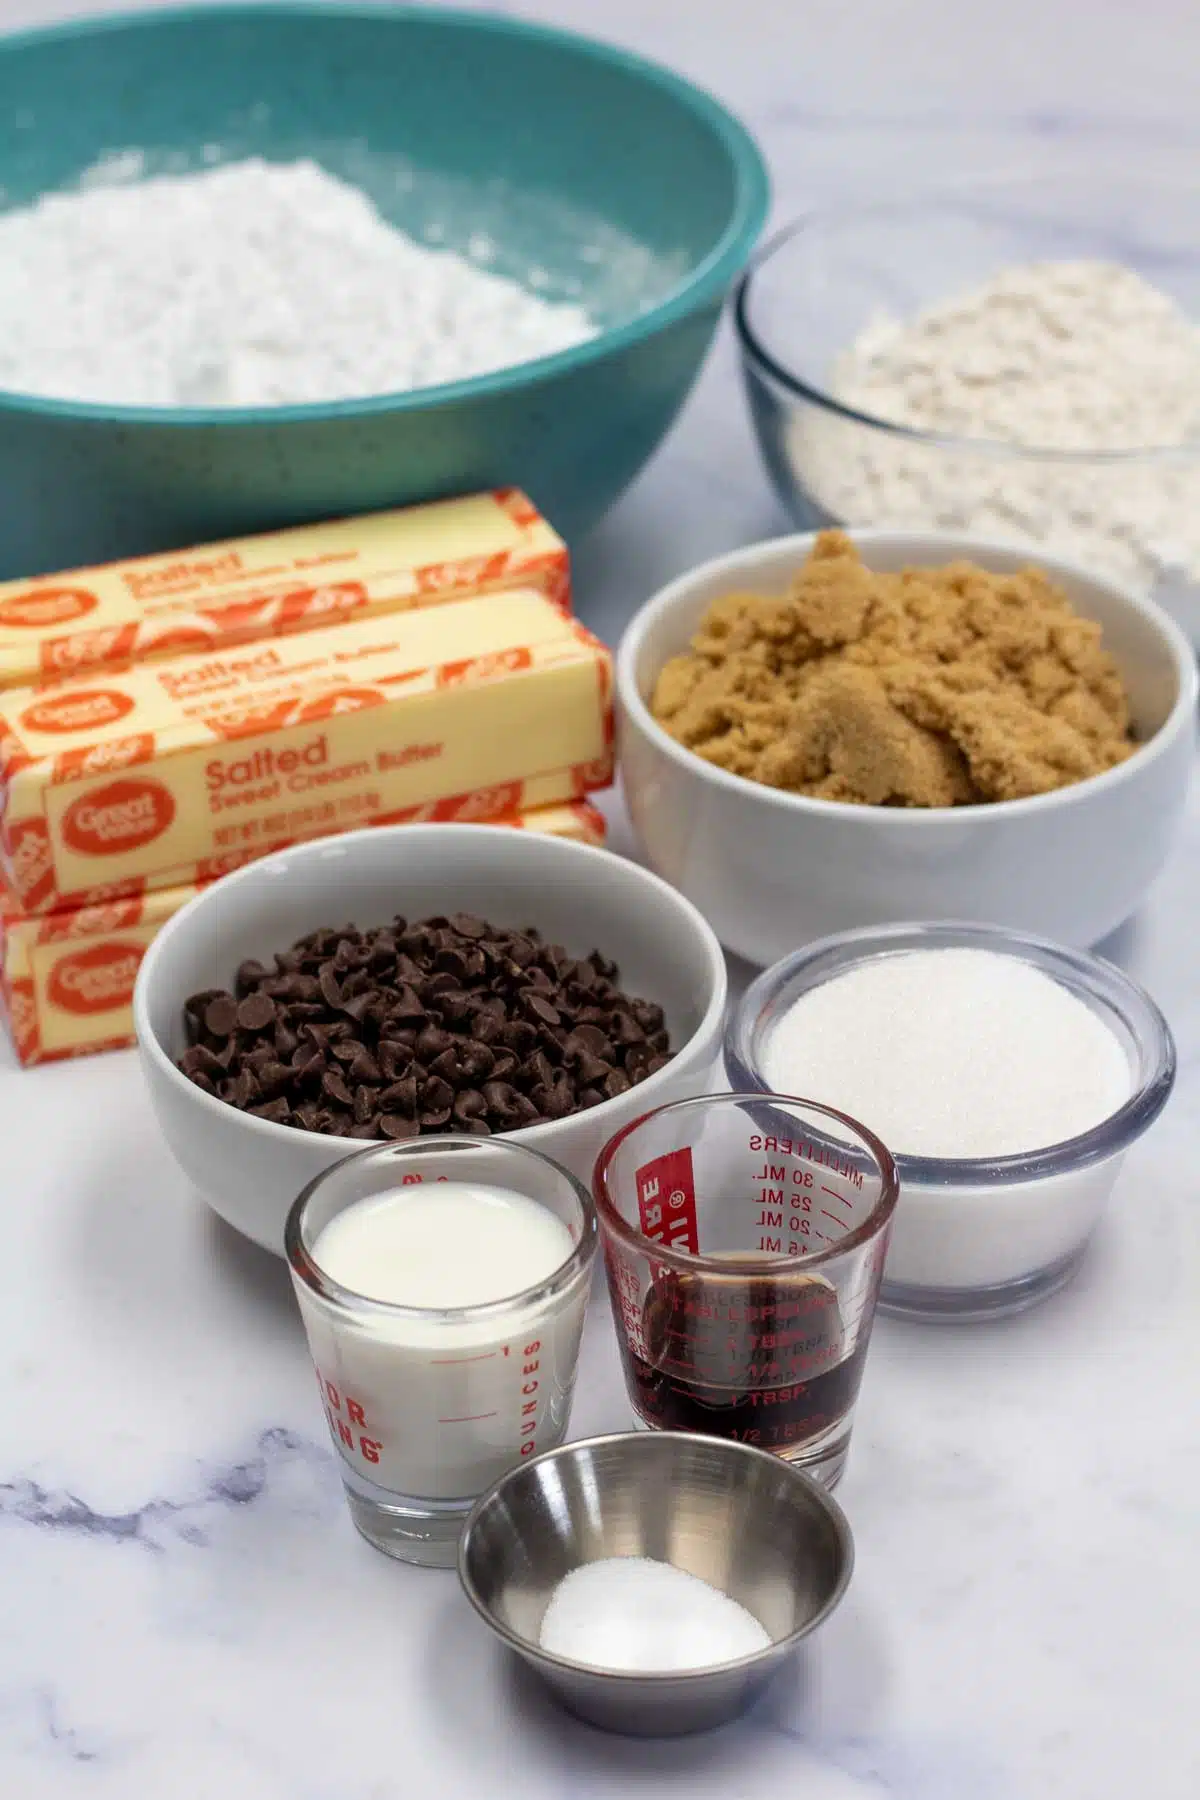 Tall image showing chocolate chip cookie dough ingredients.